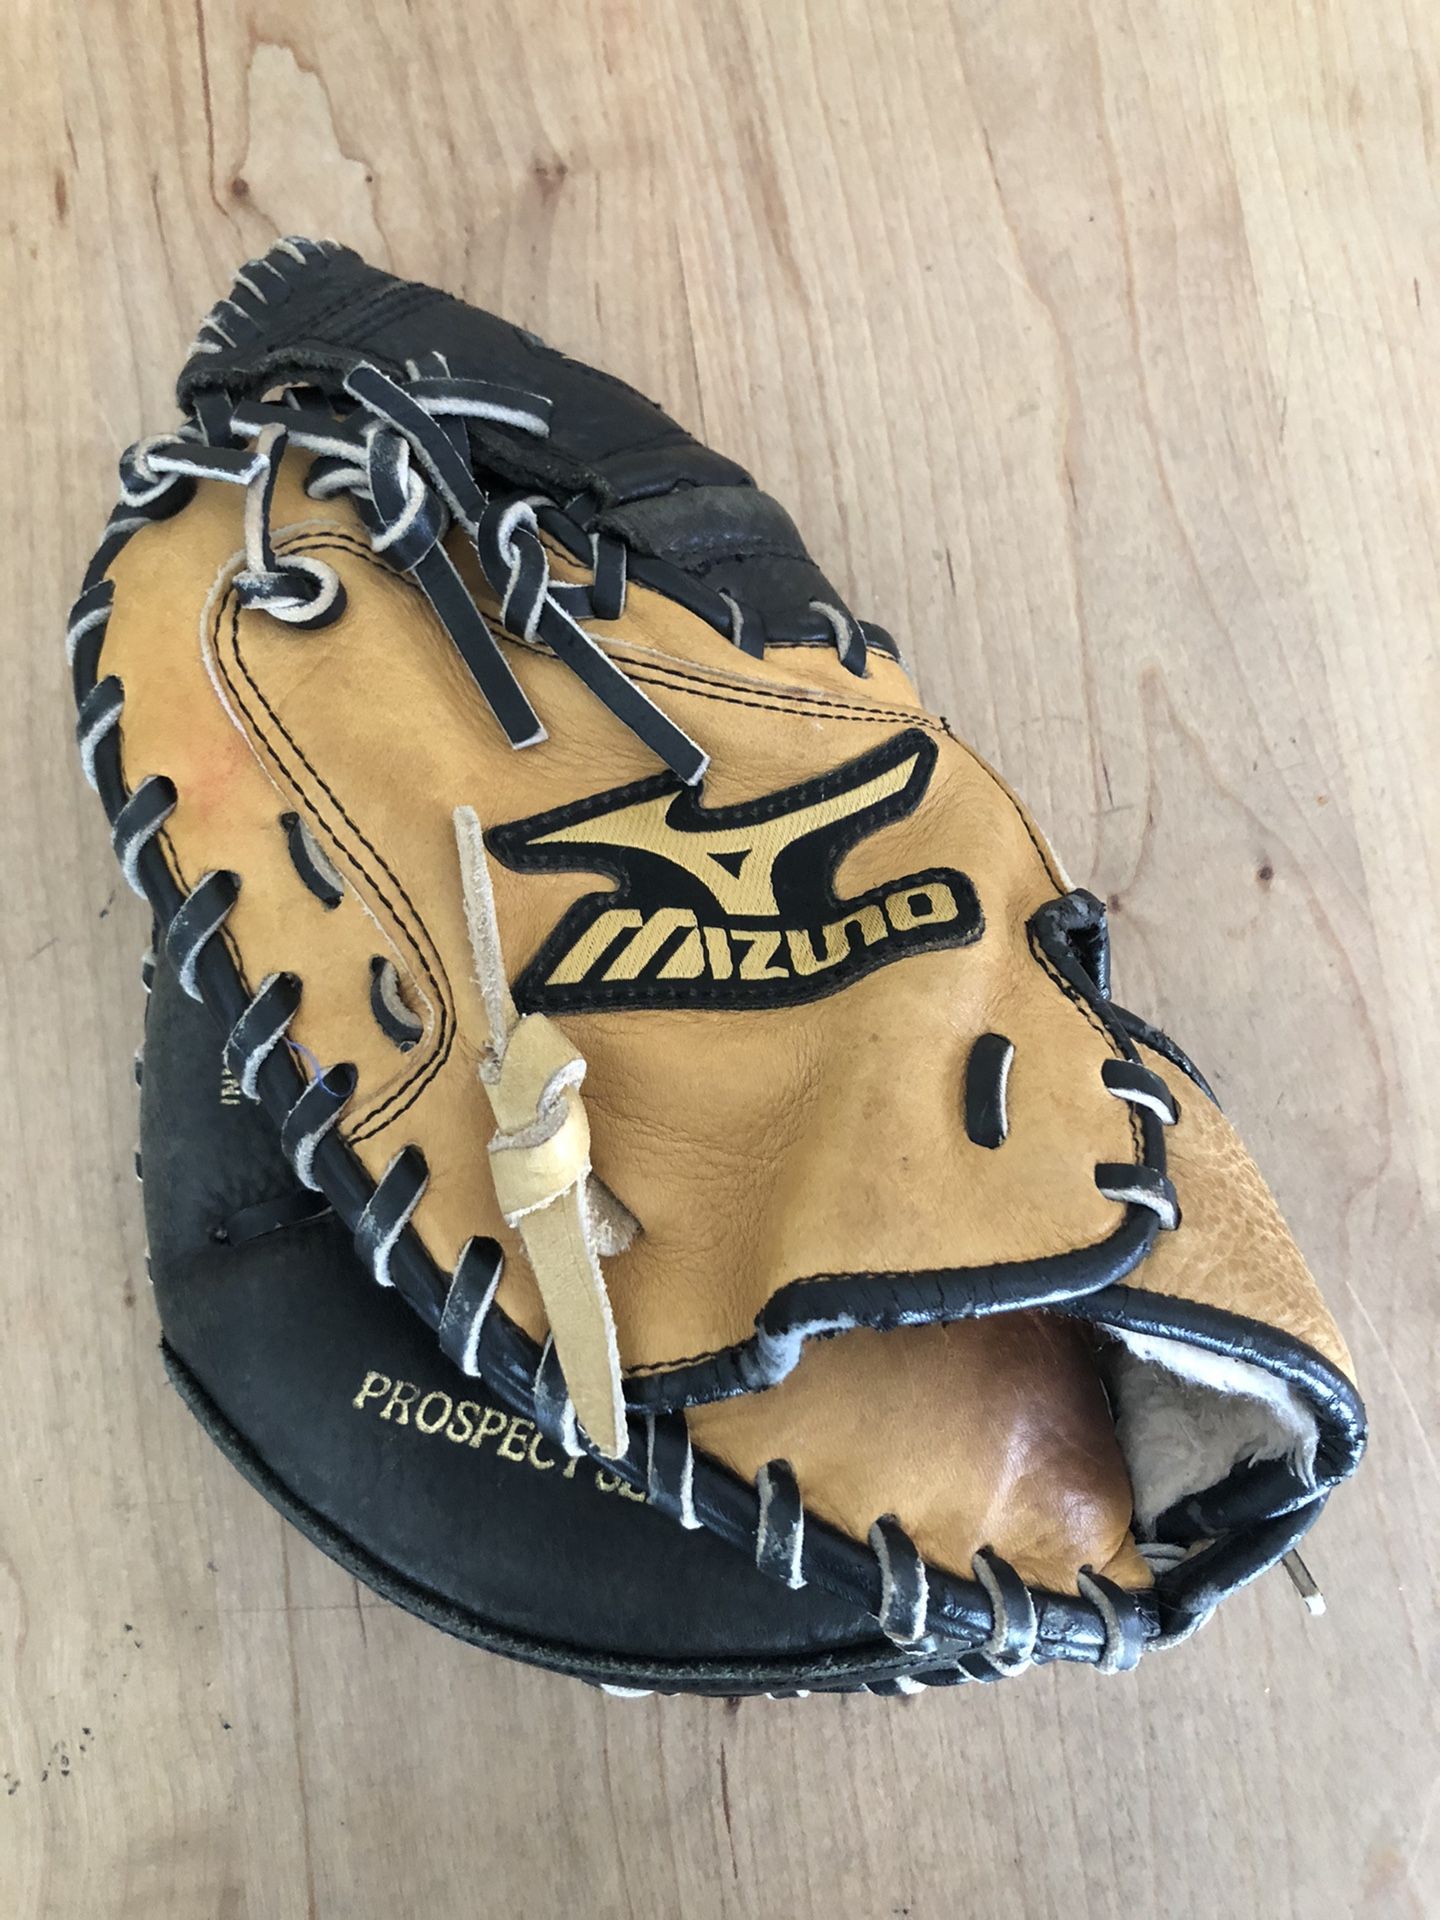 Mizuno GXC 110 Youth Leather Baseball Catchers Glove Excellent Condition!